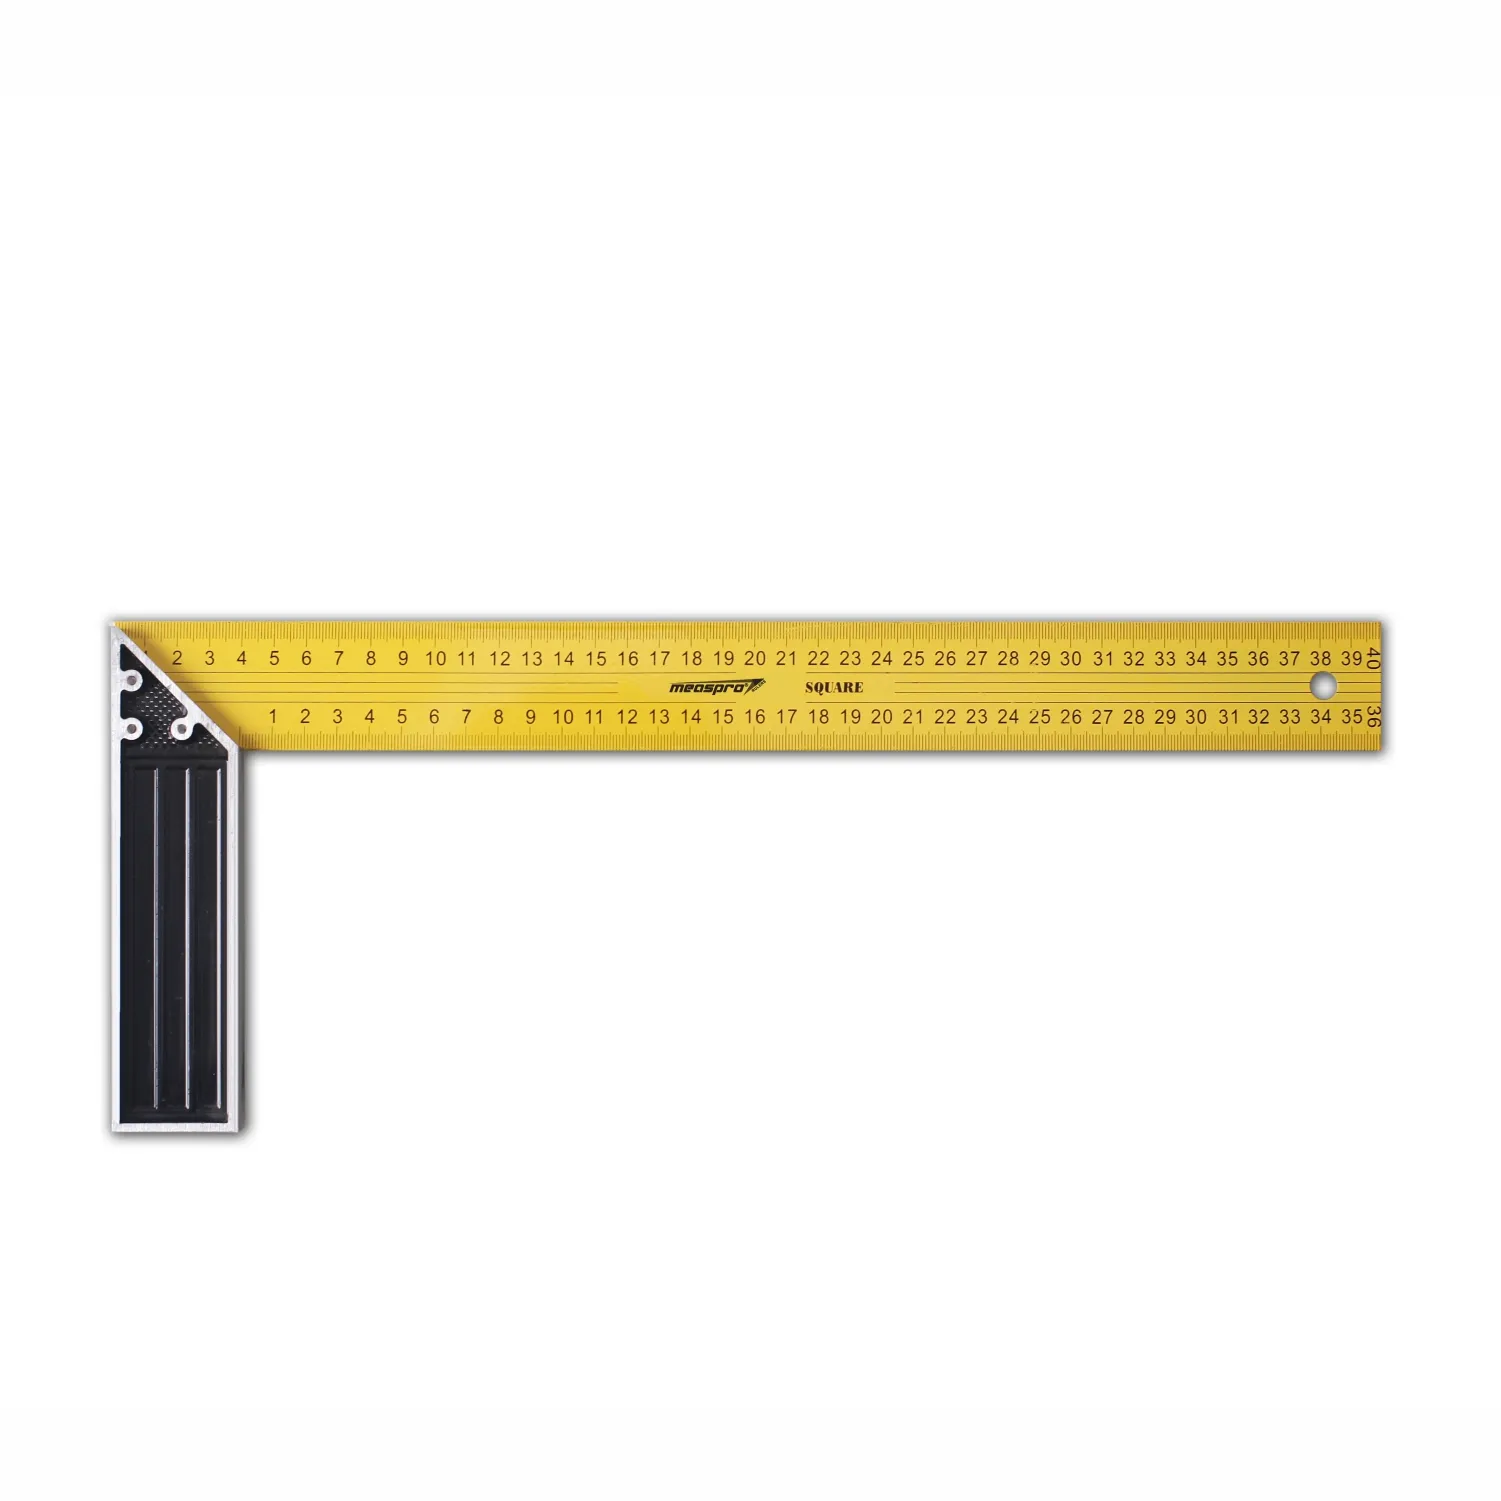 [MEASPRO]400mm Tri/ Try 90 Degree Angle Graduated Stainless Steel Square Ruler